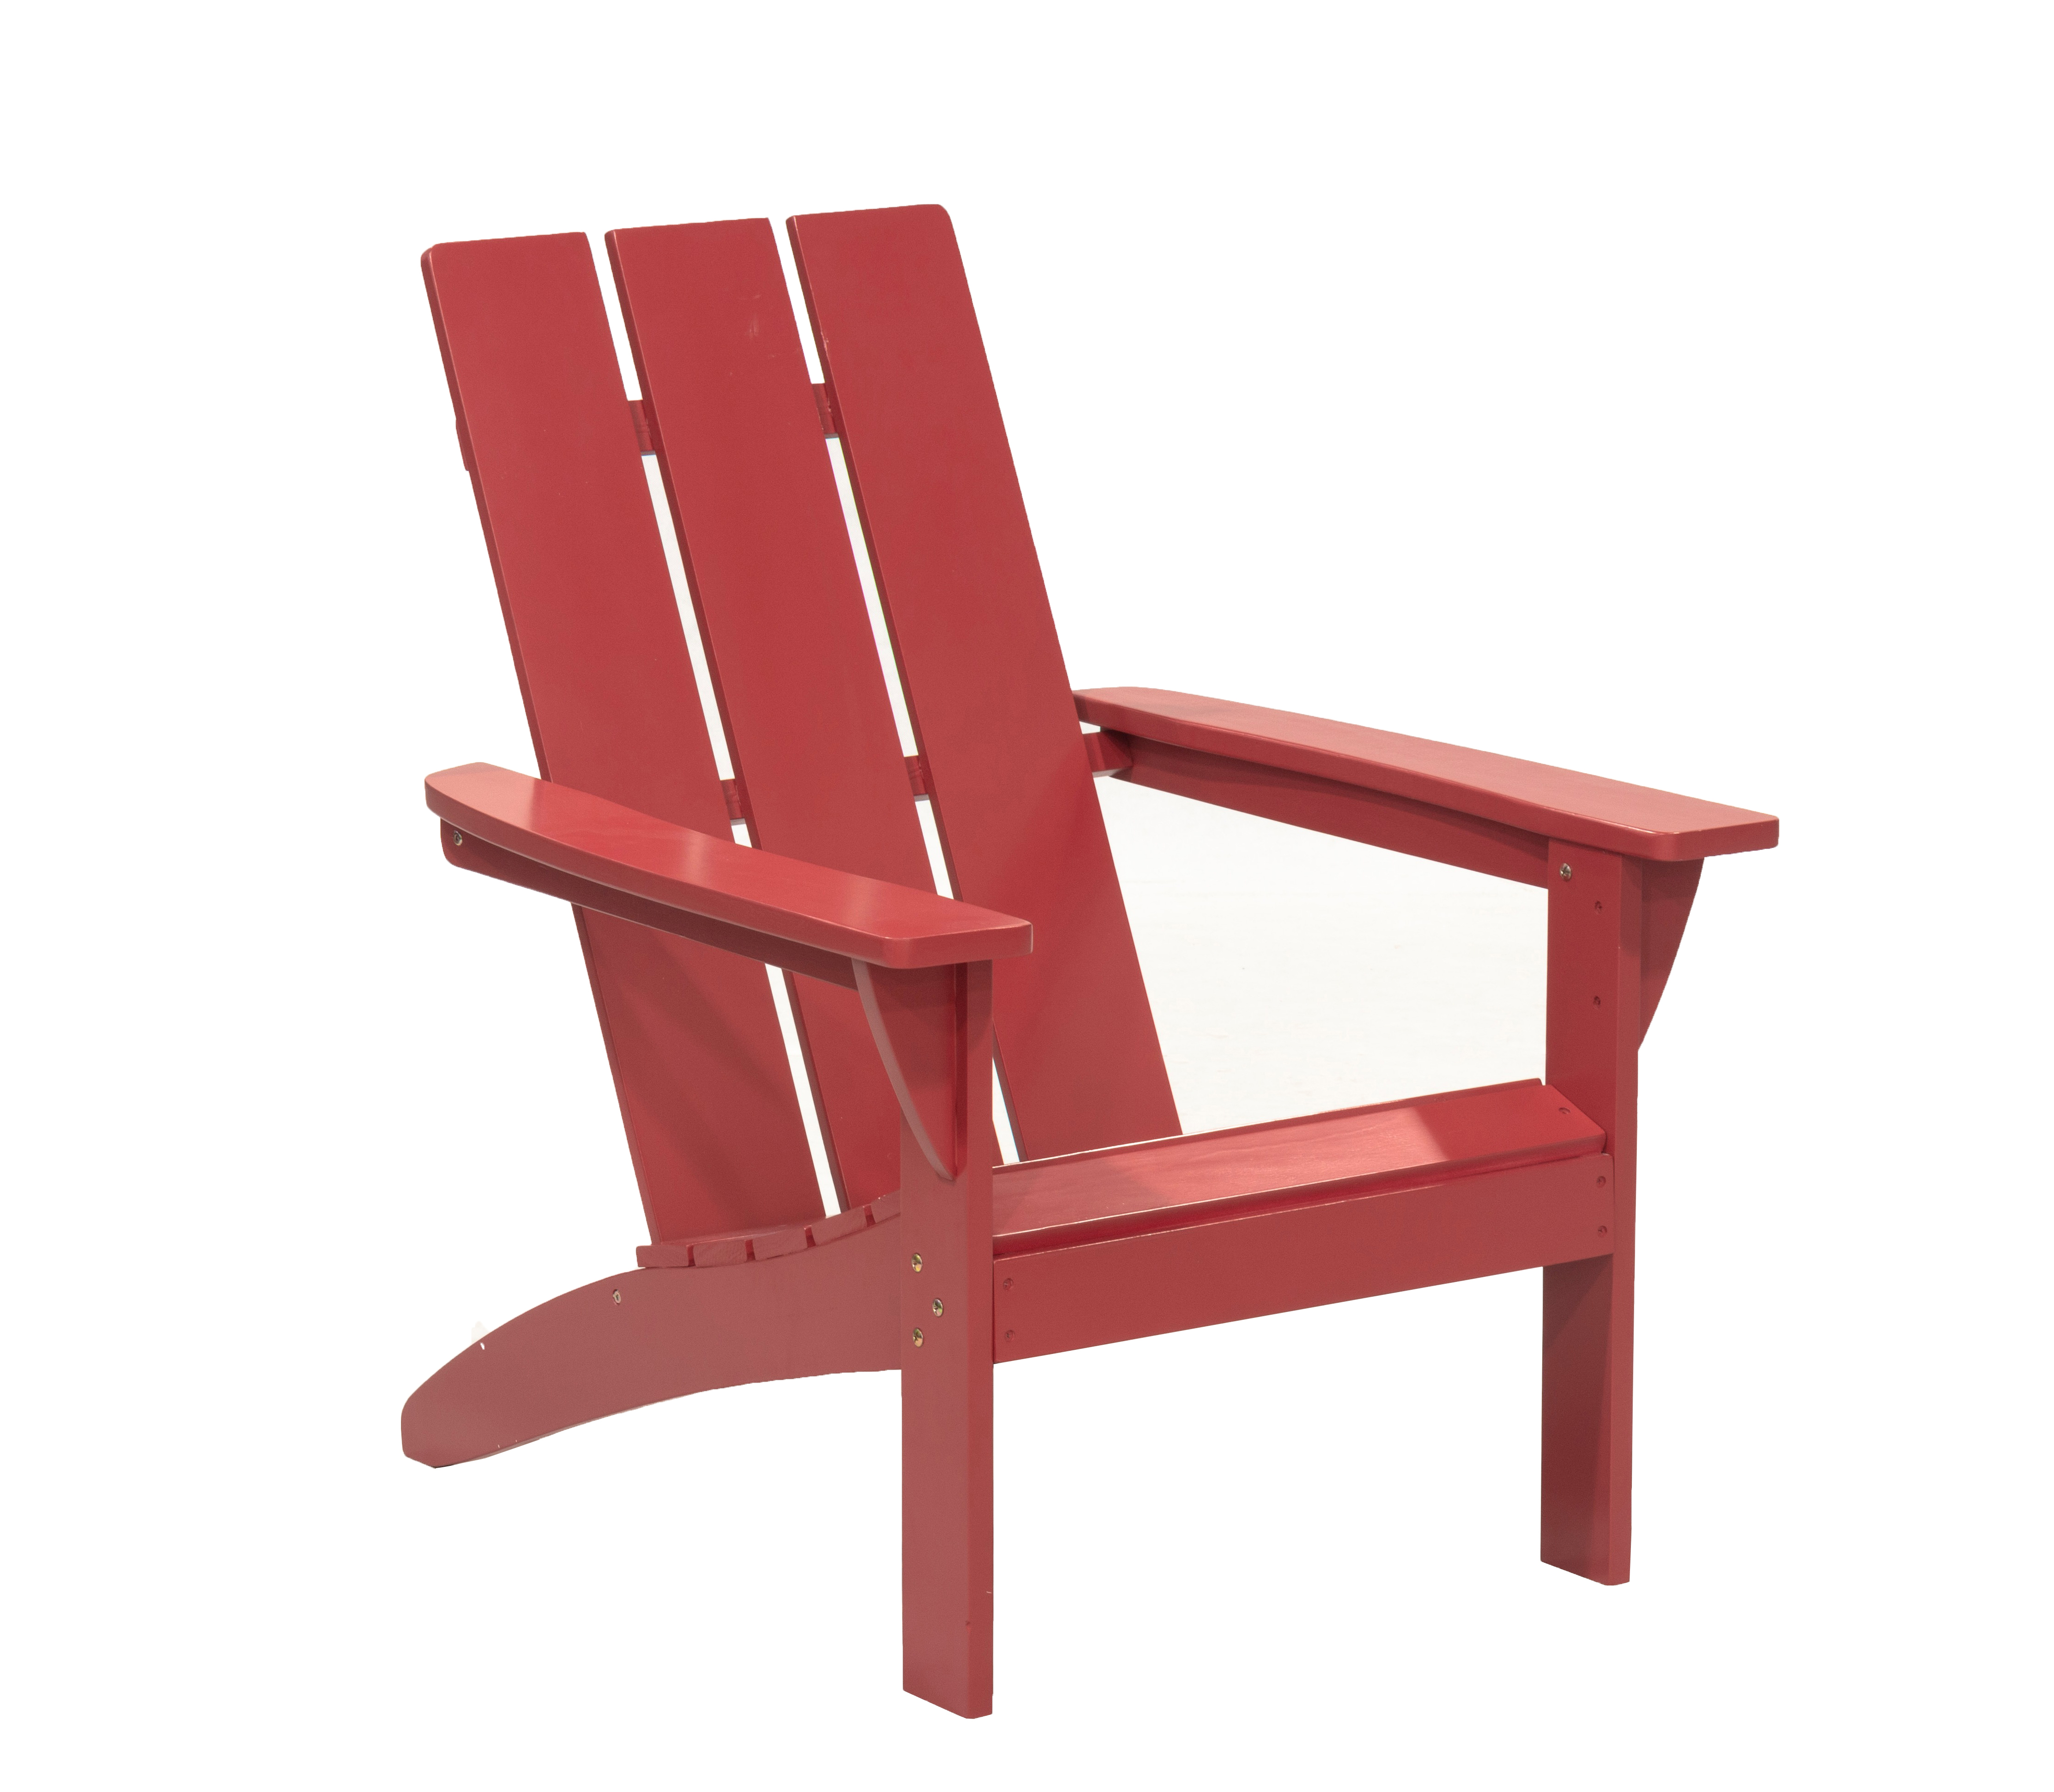 Outdoor Patio Garden Furniture 3-Piece Wood Adirondack Chair Set, Weather Resistant Finish,2 Adirondack Chairs and 1 Side Table-Red - image 5 of 11